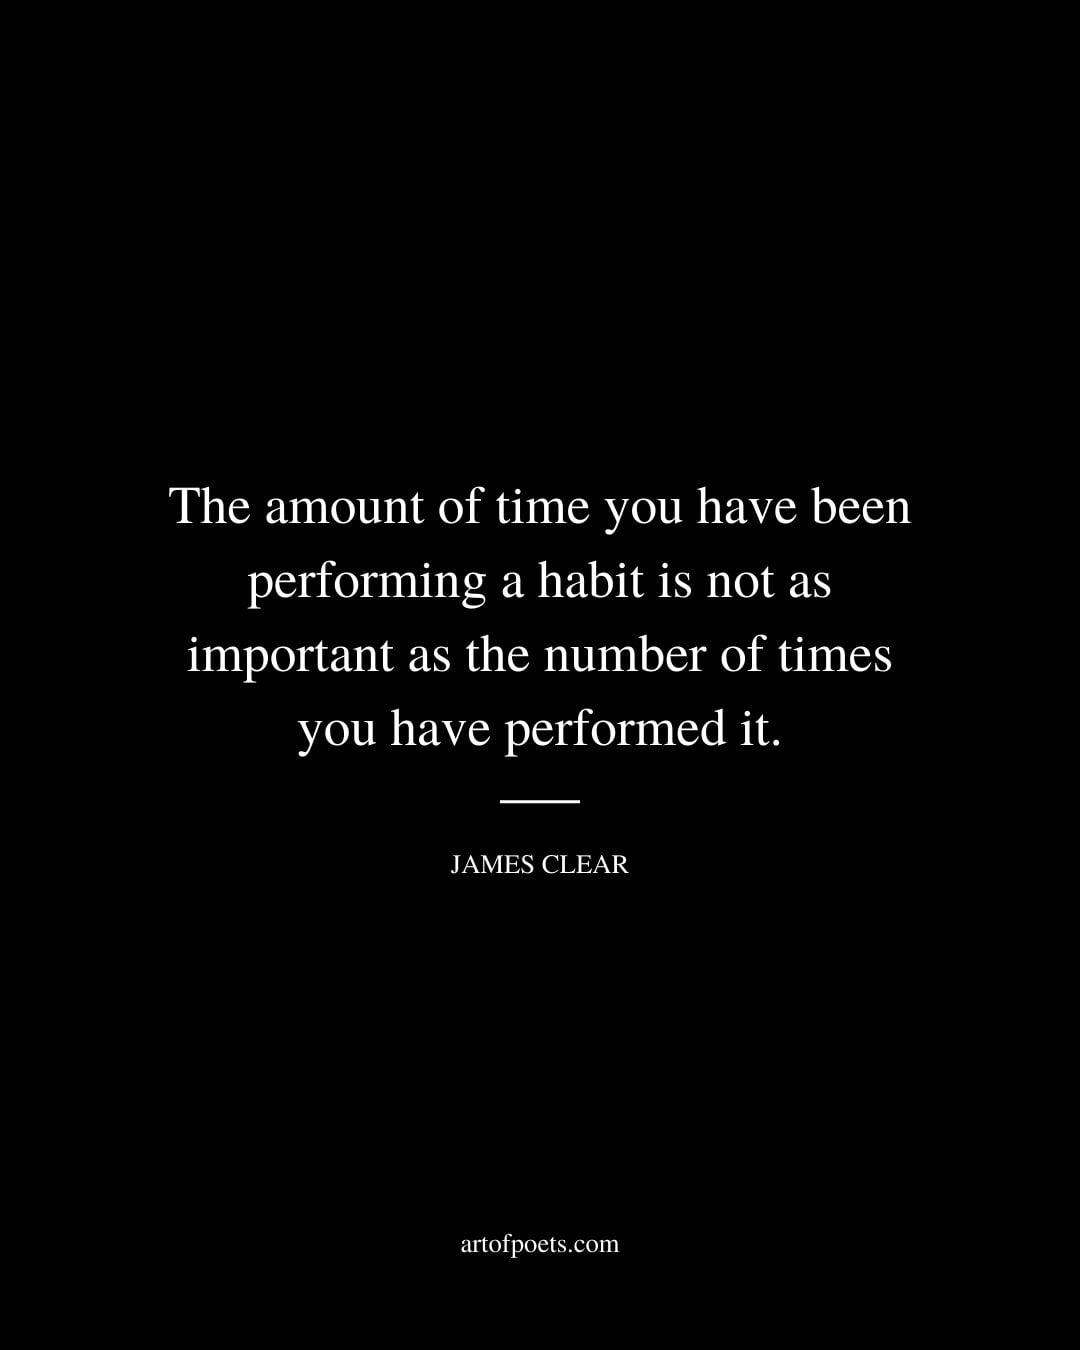 The amount of time you have been performing a habit is not as important as the number of times you have performed it